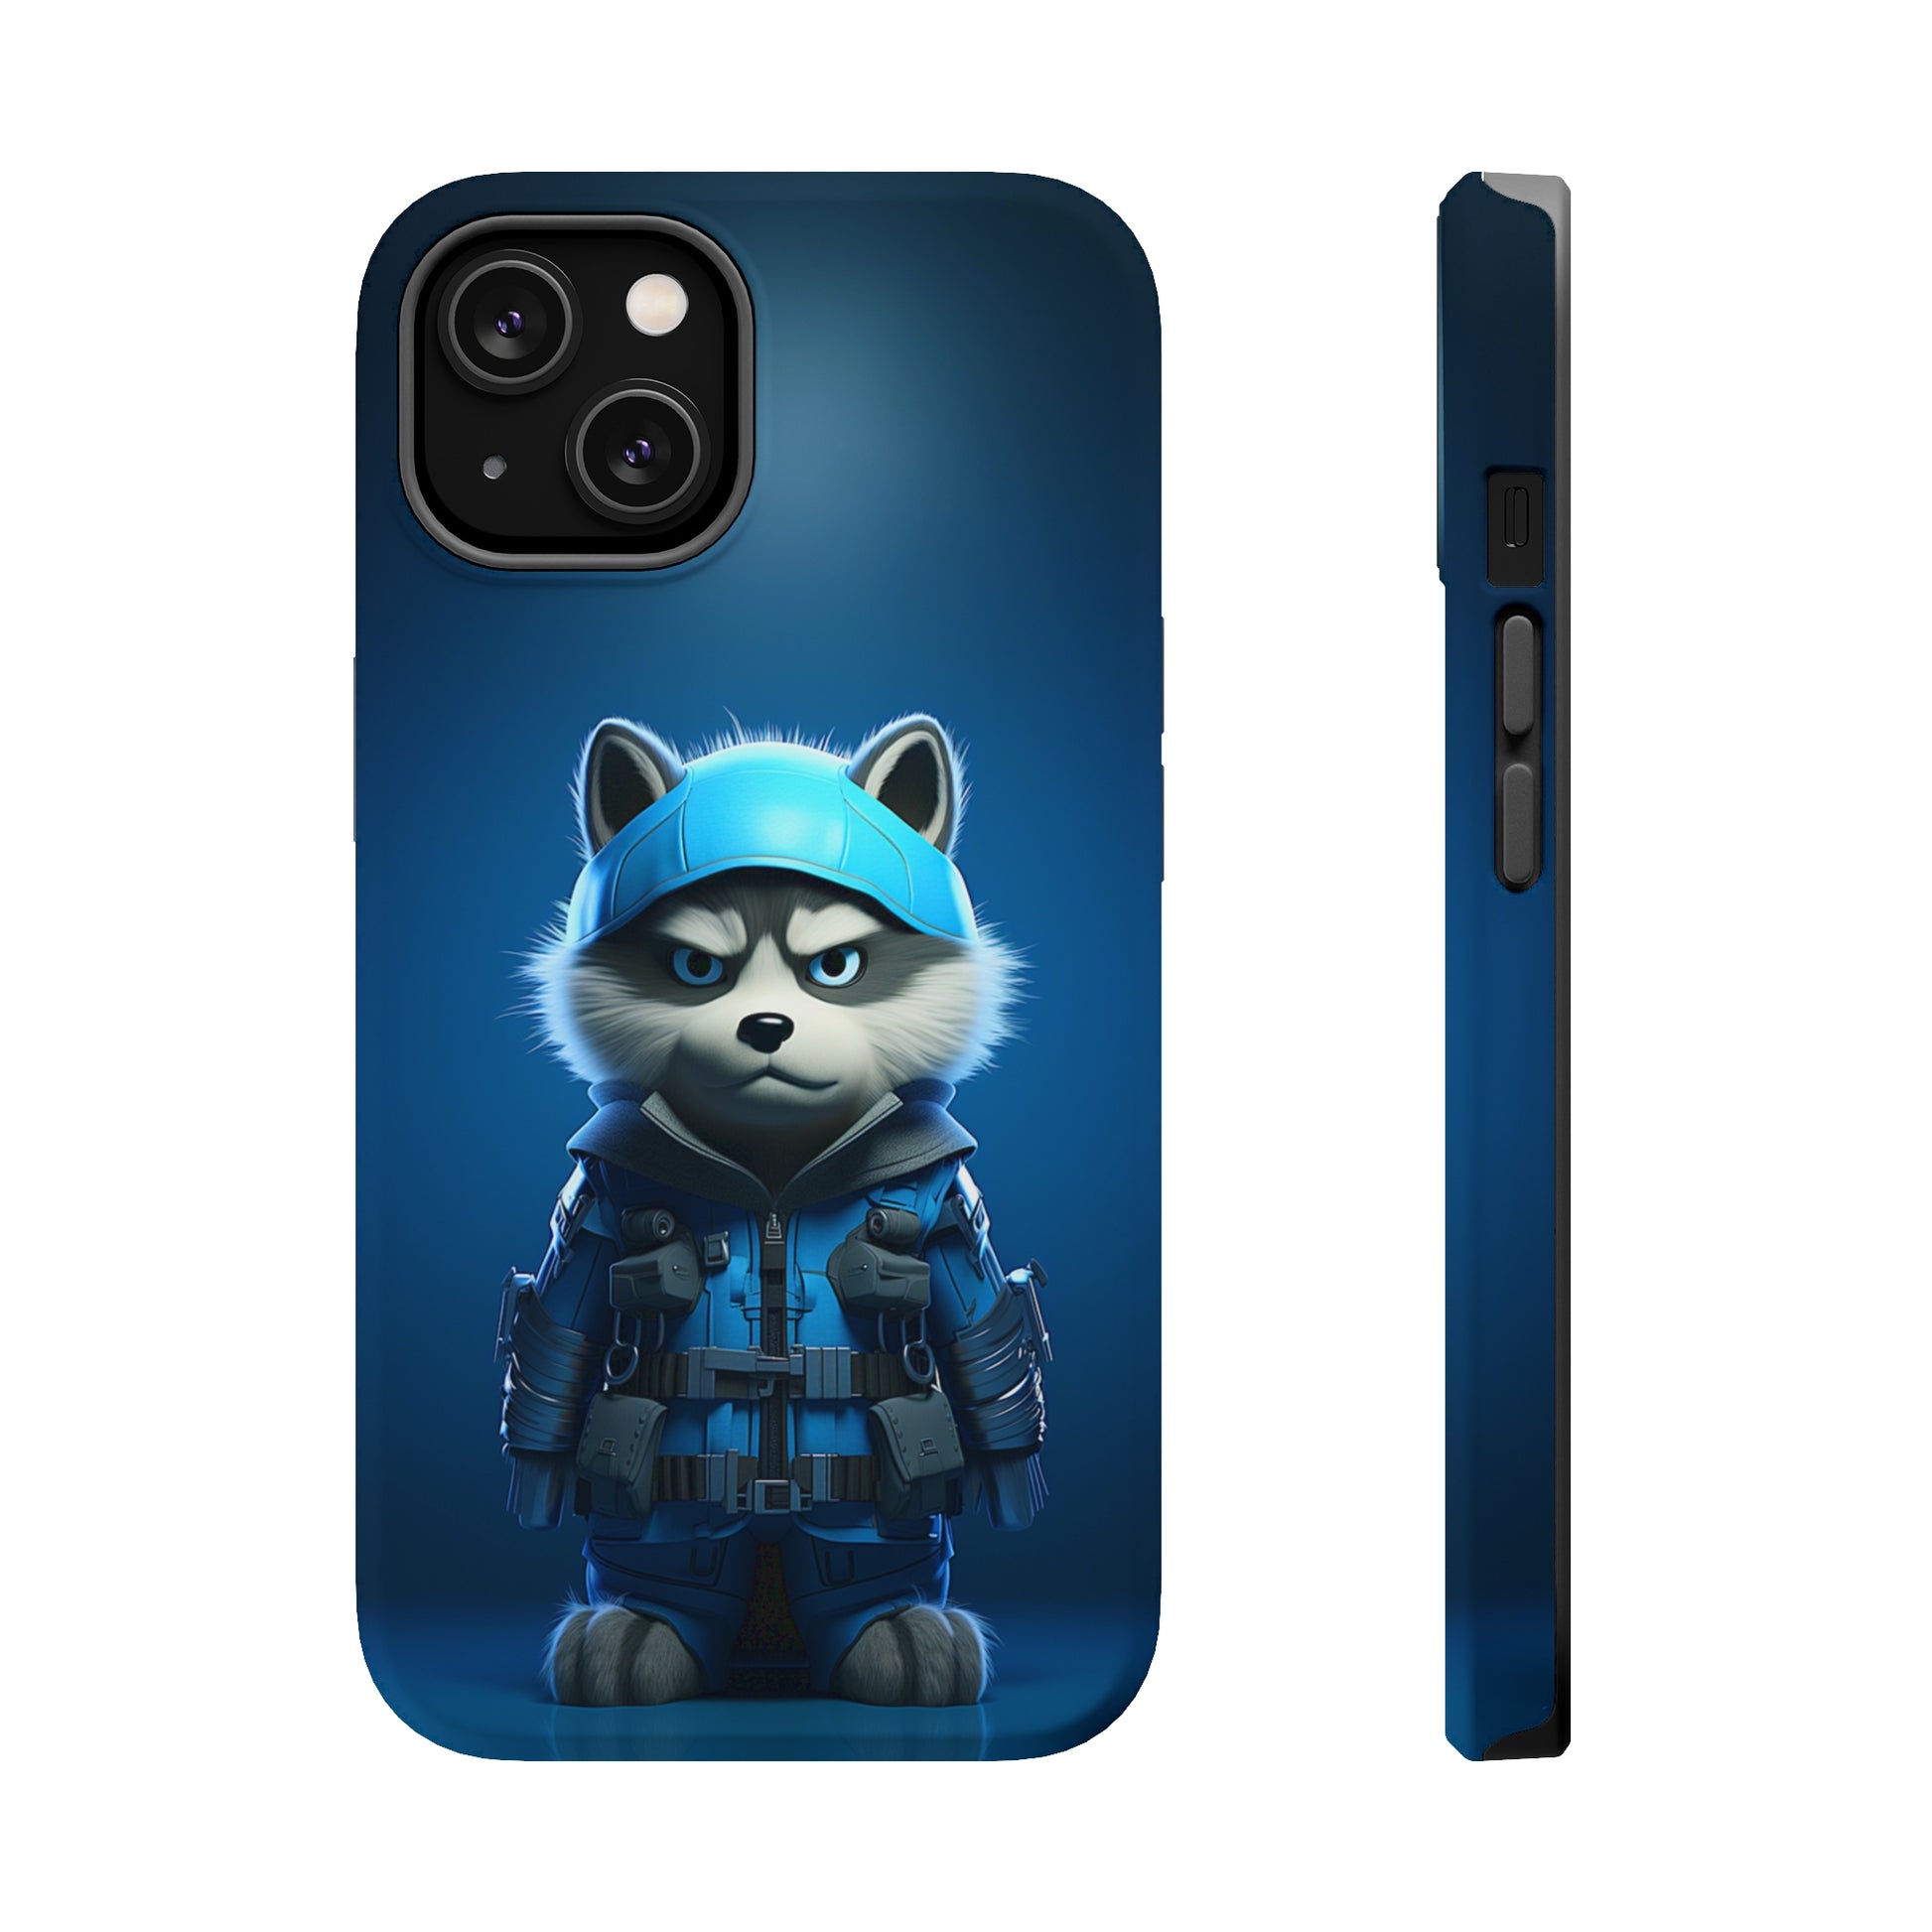 Covert Critter (iPhone MagSafe Case)Marshmallow in Blue Sky MagSafe Durable Case: Style Meets Protection 📱✨
Upgrade your device with Rima Gallery's Covert Critter MagSafe Durable Case. This case isn’tRimaGallery